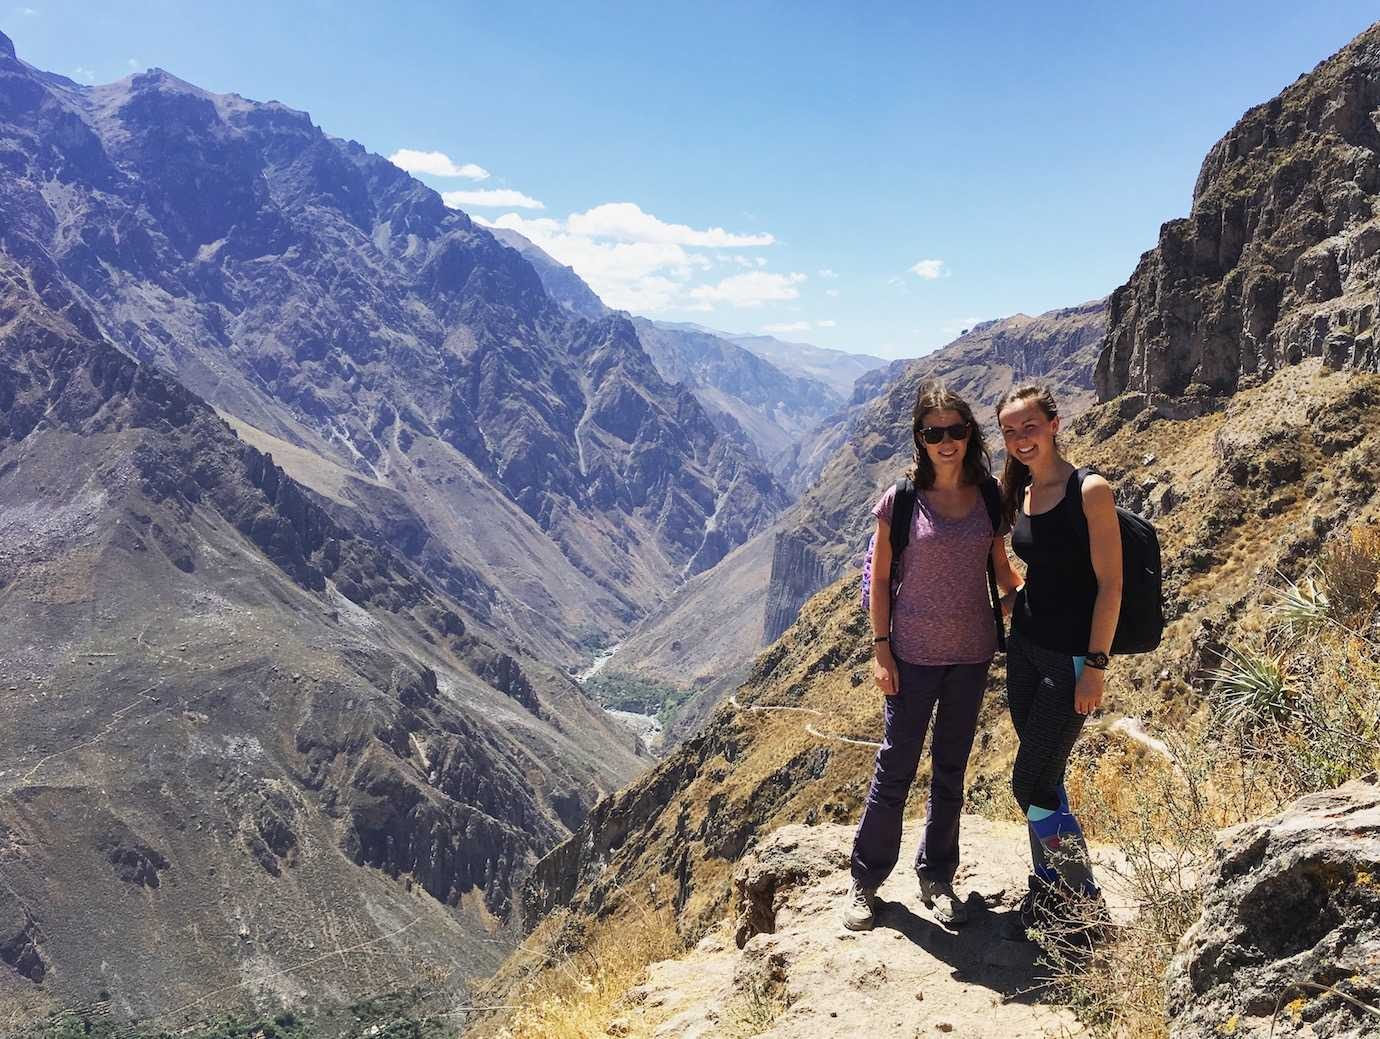 Colca Canyon trek day 1. Start of the hike.